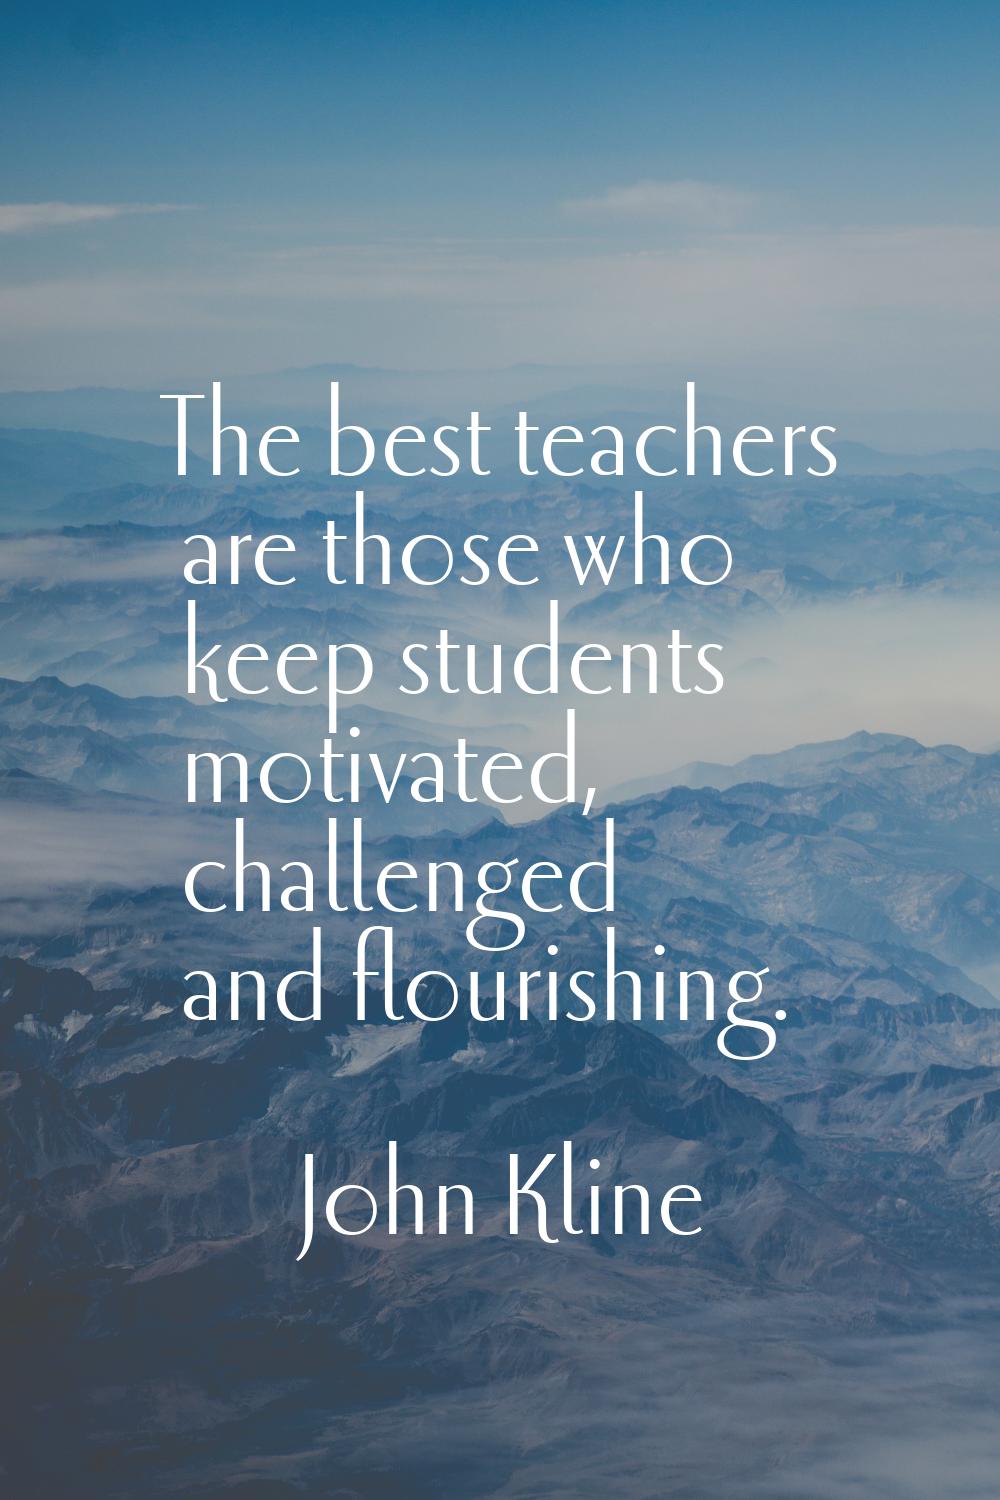 The best teachers are those who keep students motivated, challenged and flourishing.